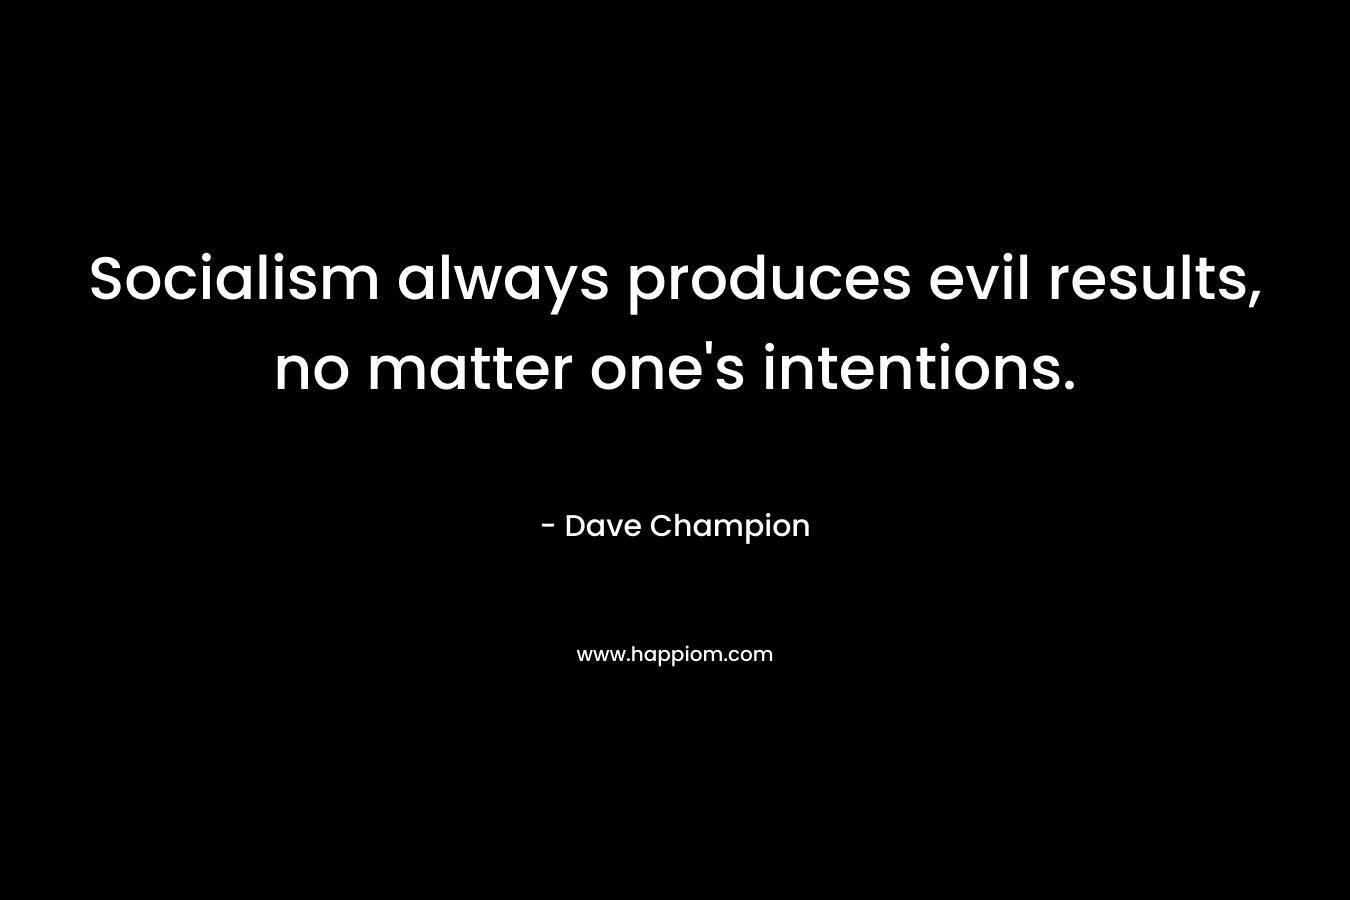 Socialism always produces evil results, no matter one’s intentions. – Dave Champion